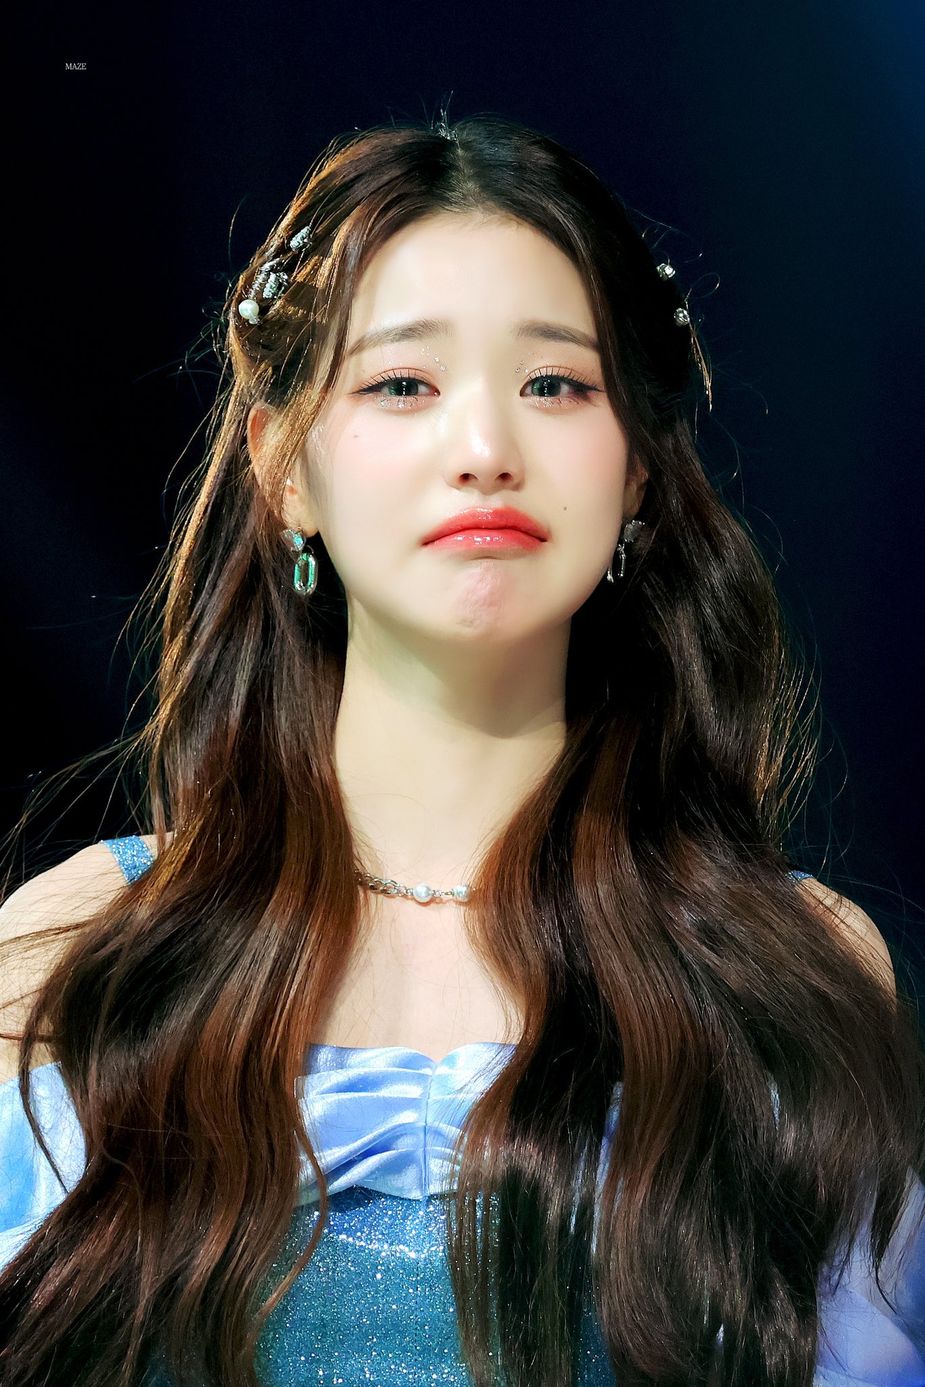 IVE's Jang Wonyoung Goes Viral For Looking Like An Angel While Crying ...